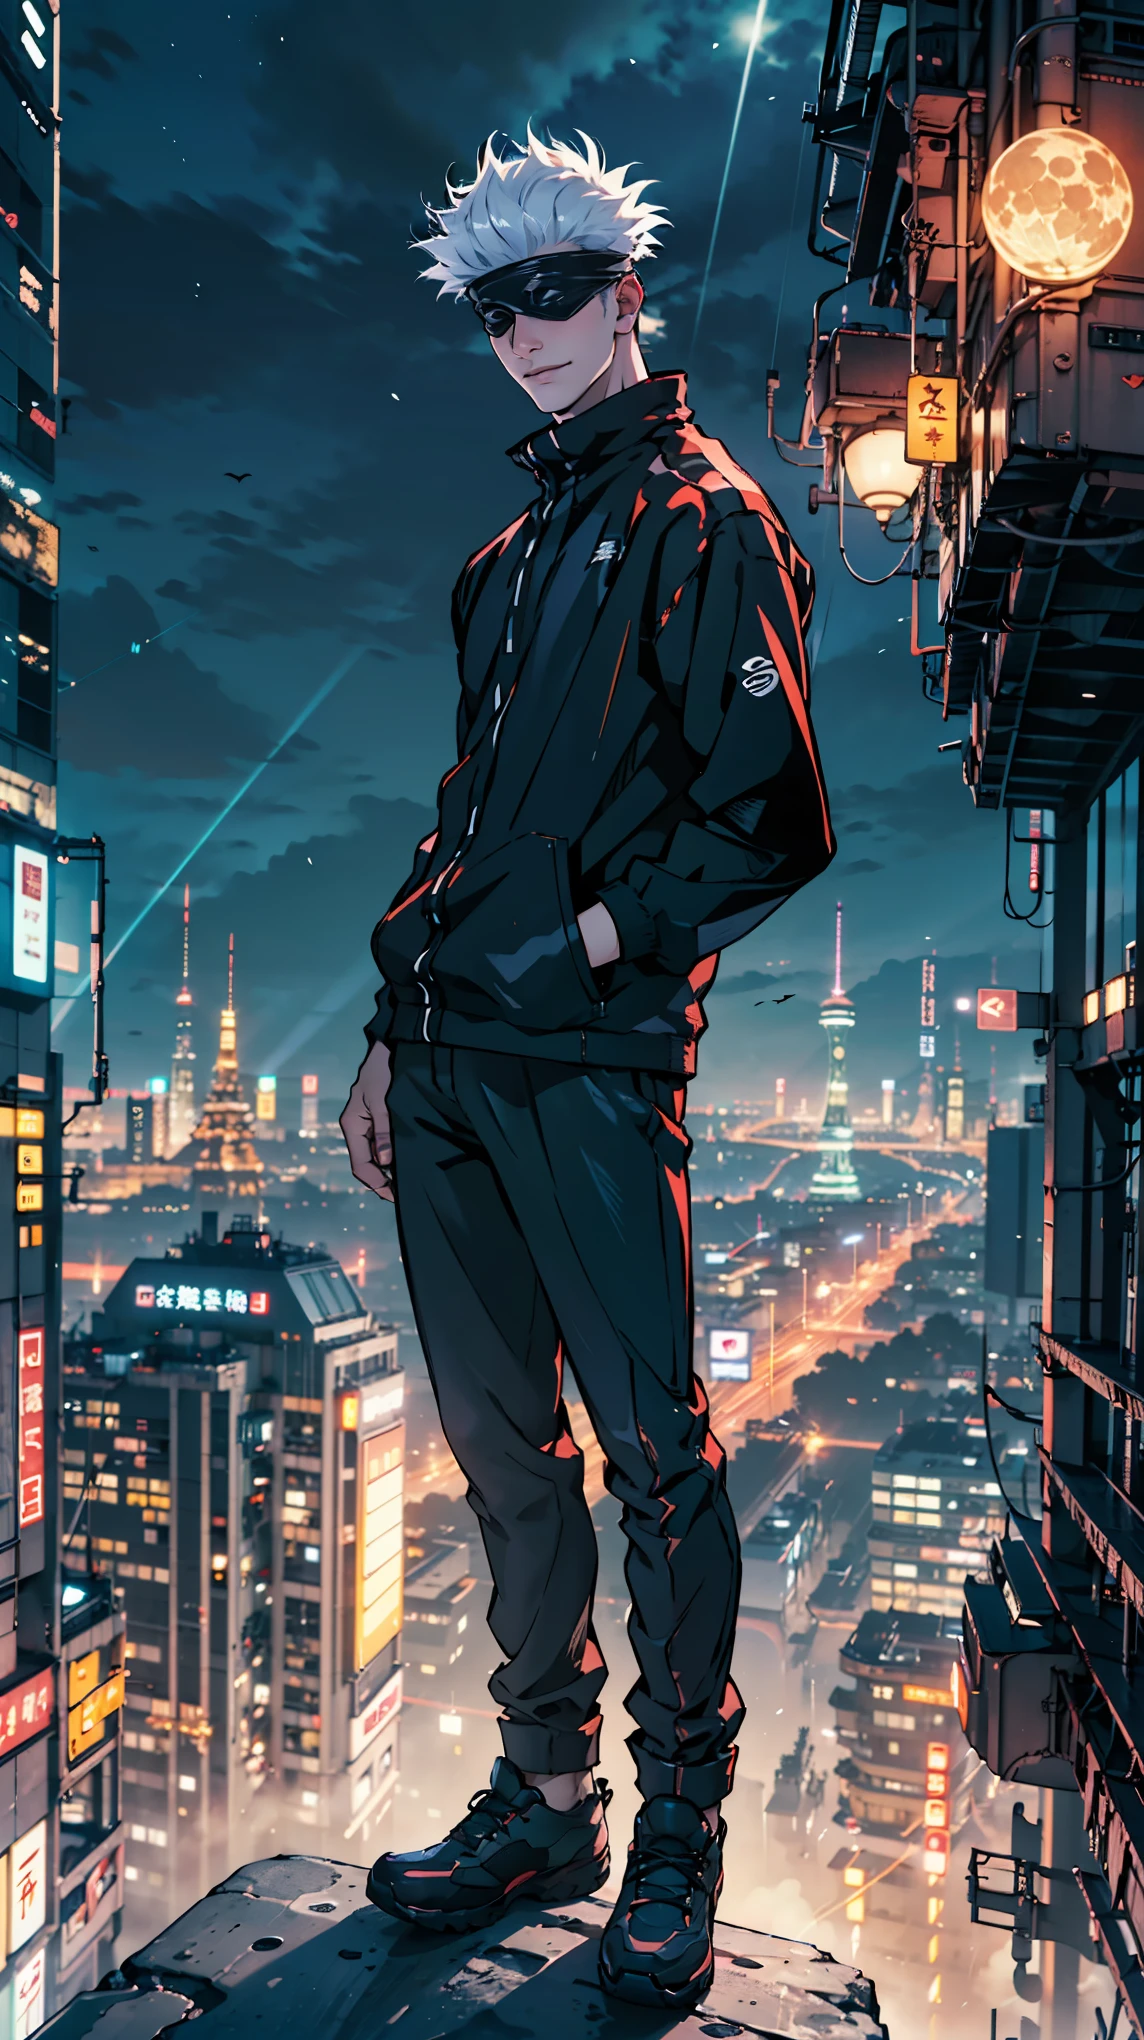 1boy, full body shot, perfect hand and fingers, satoru gojo, blindfold, black outfit, white hair, look at sky, smirk, red and blue moon city night background, wallpaper, cinematic,High resolution 8K, Bright light illumination, lens flare, sharpness, masterpiece, top-quality, The ultra -The high-definition, high resolution, extremely details CG, Anime style, Film Portrait Photography,masterpiece,hyperdetail